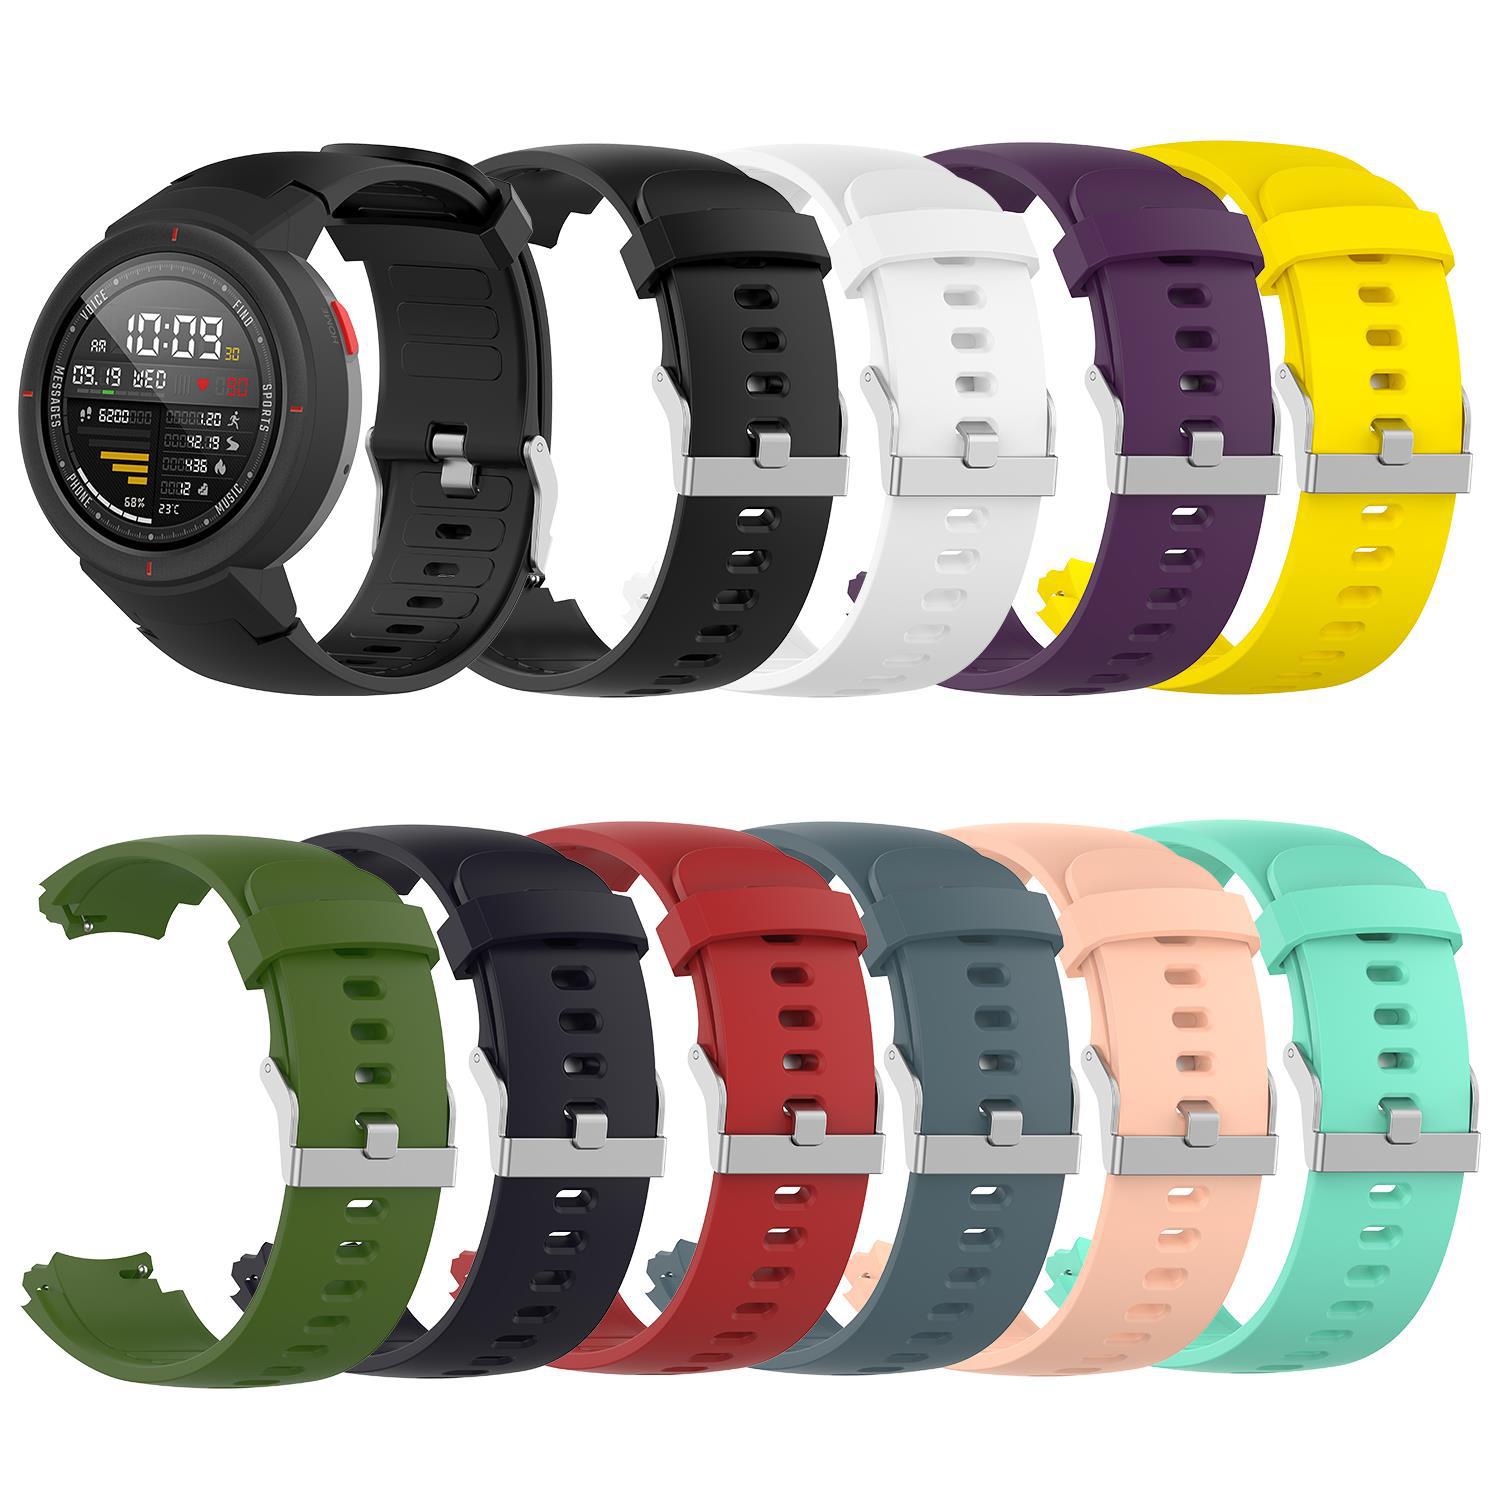 Bakeey-22mm-Multi-color-Silicone-Replacement-Strap-Smart-Watch-Band-For-Amazfit-Verge-1739374-1